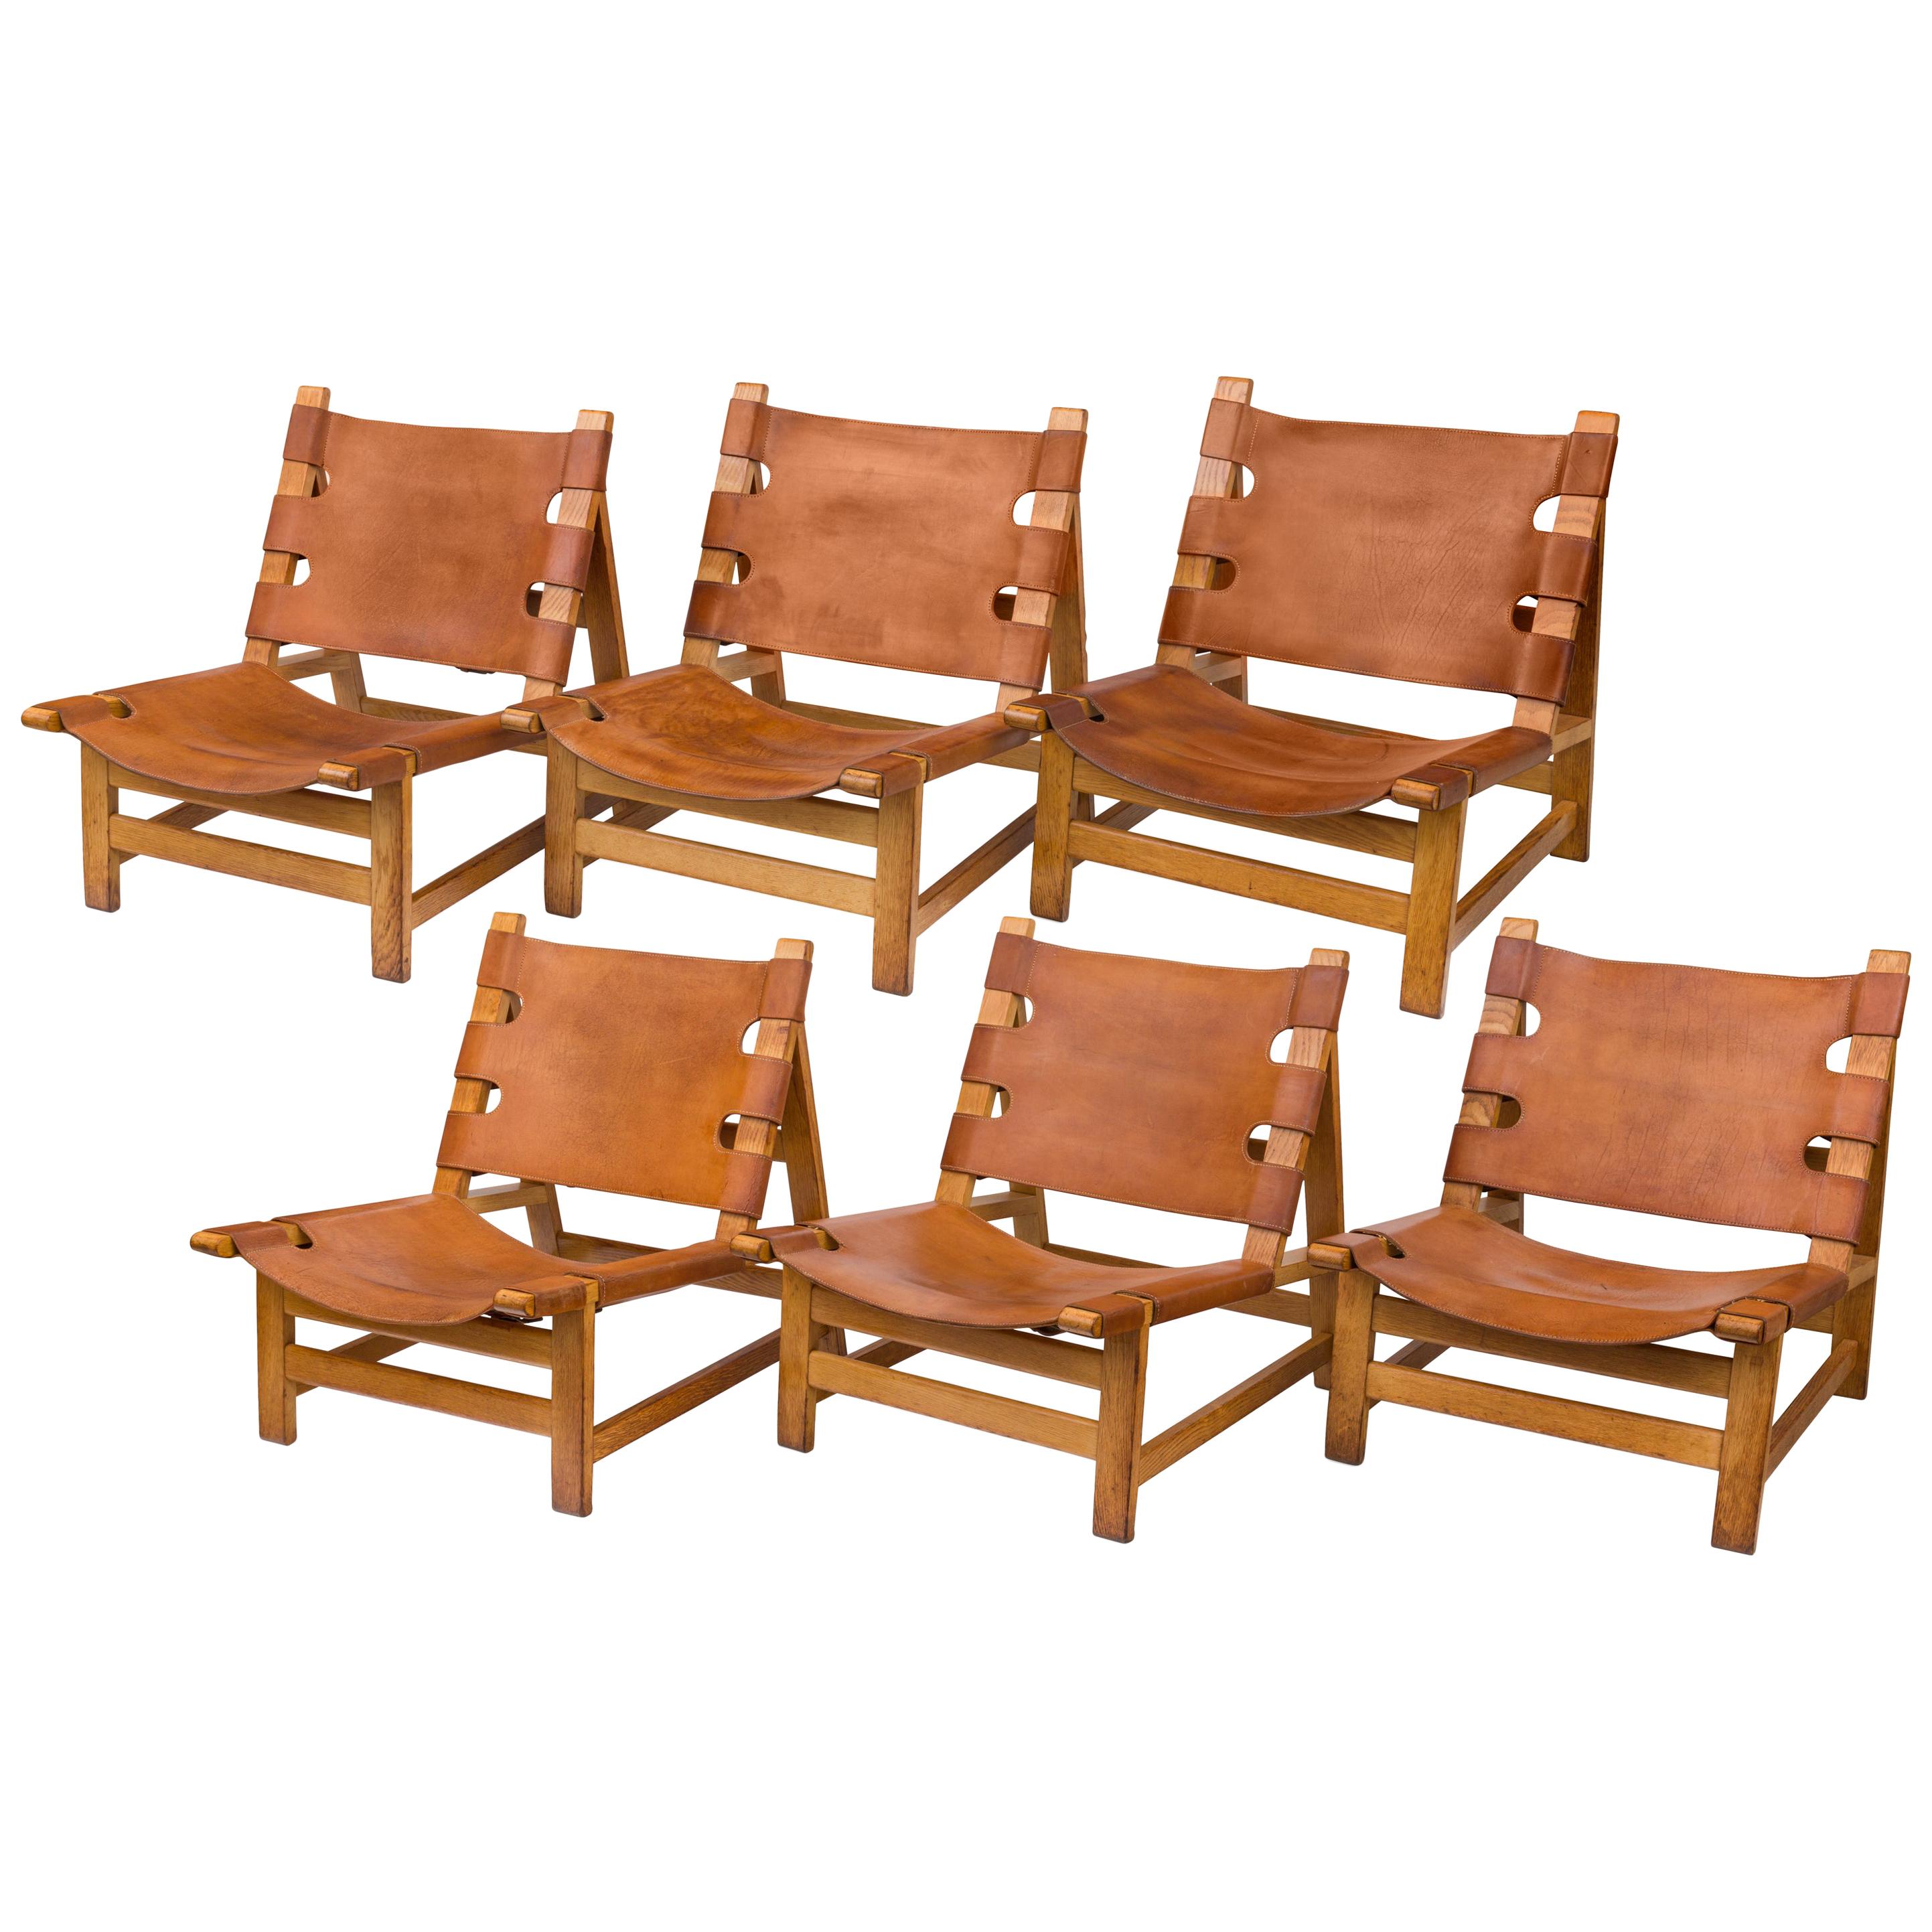 Børge Mogensen Oak and Leather Lounge Chairs, Denmark, 1960s